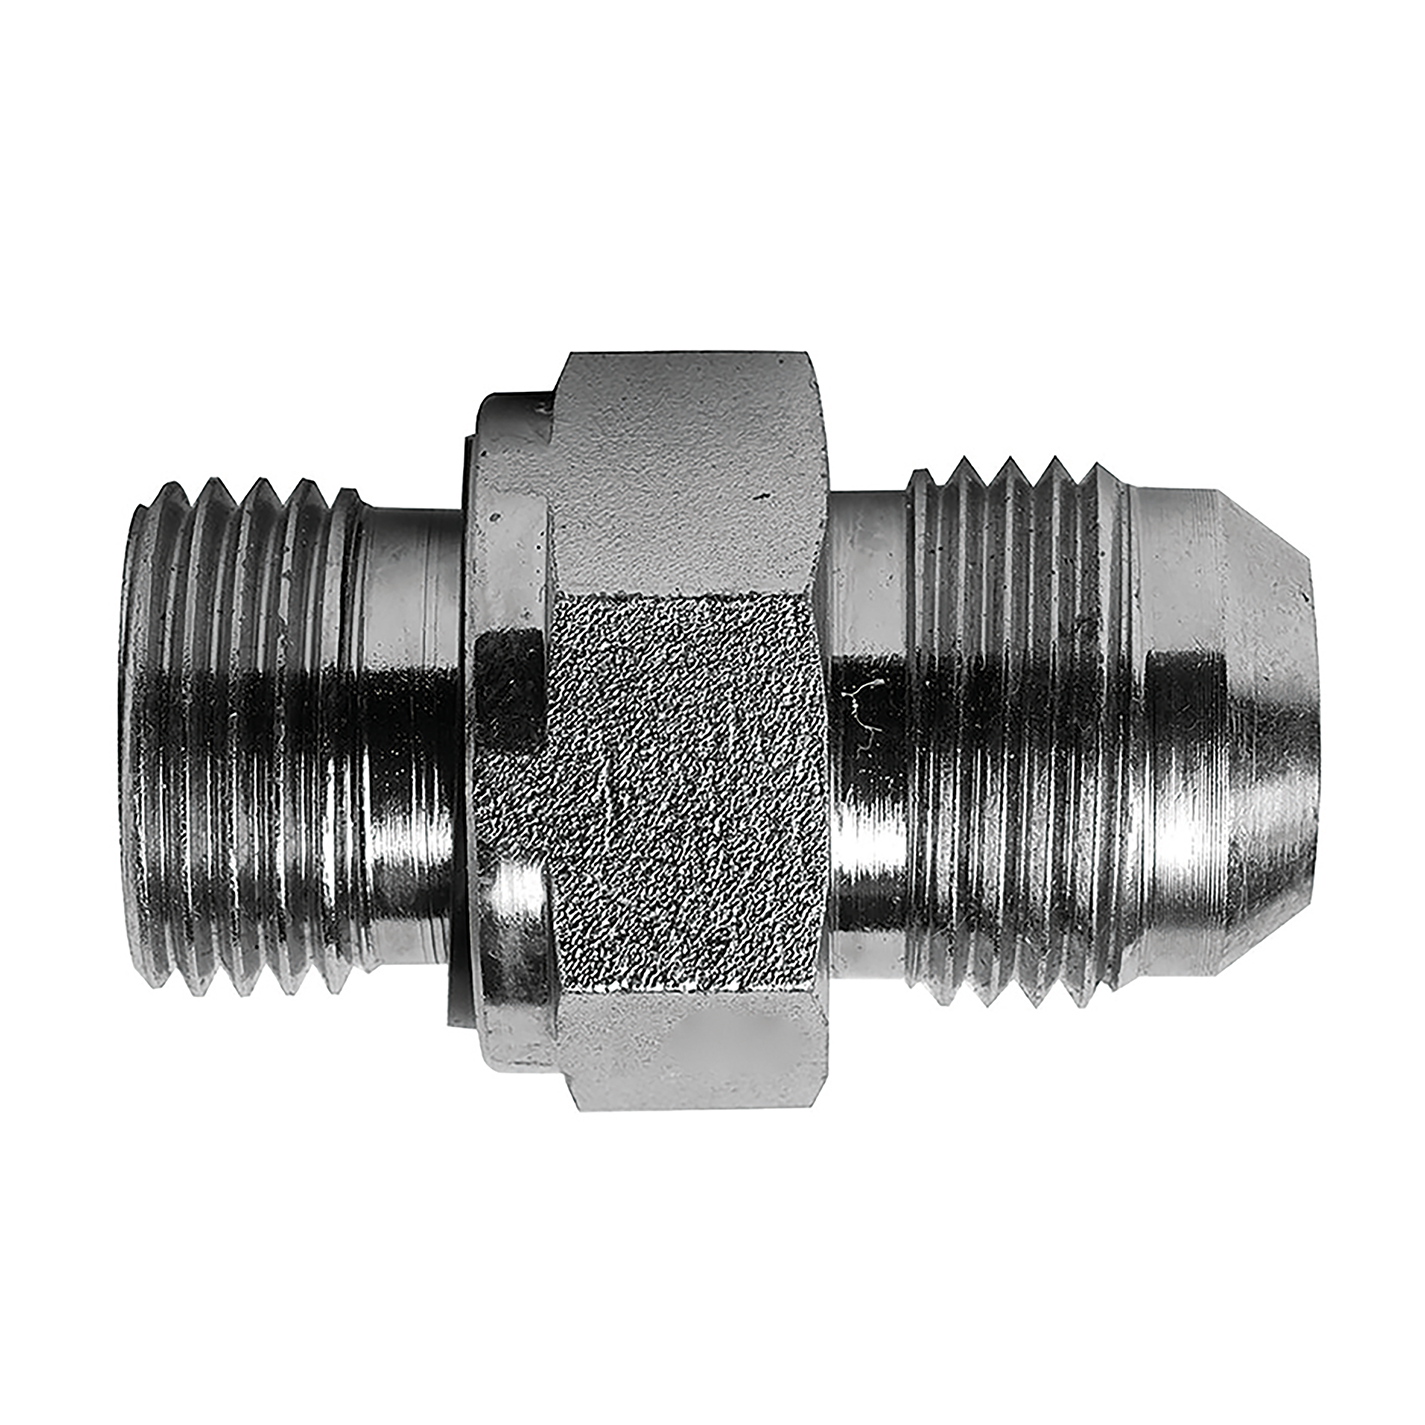 1/2" BSPP Malex3/4" JIC Male Adaptor with Seal